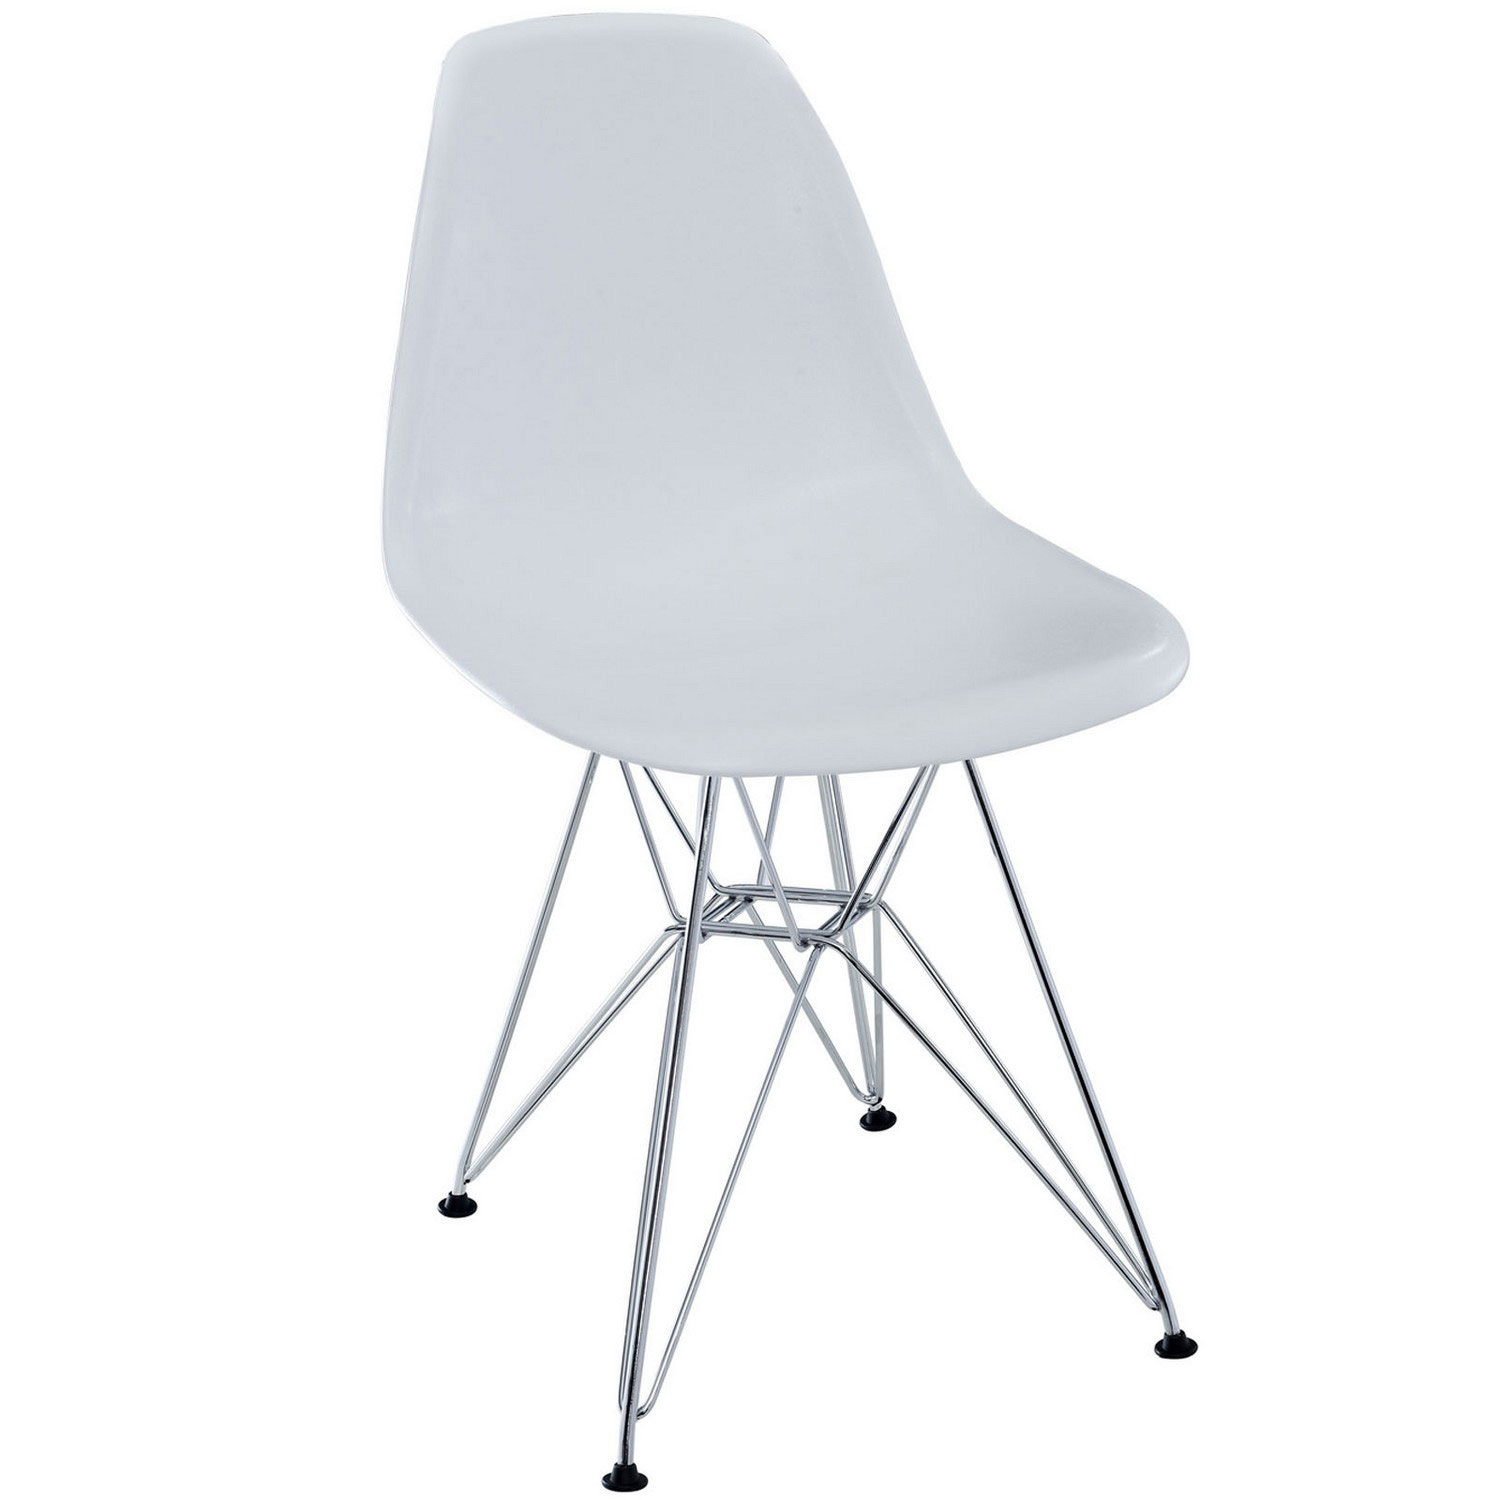 Modway Paris Dining Side Chair - White